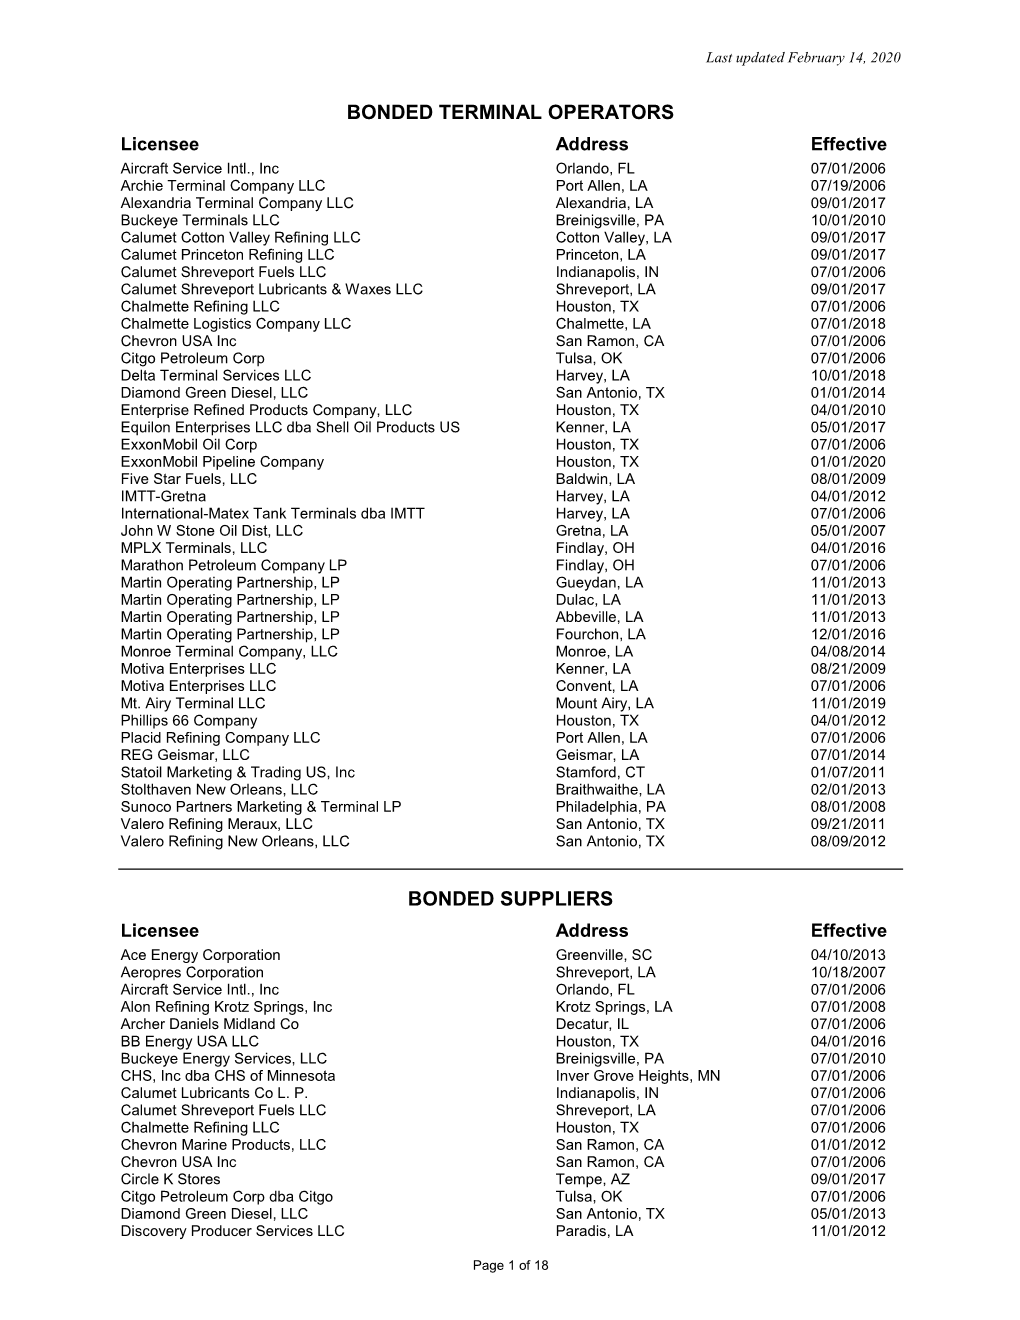 List of Bonded Gasoline Dealers As of March 31, 1998